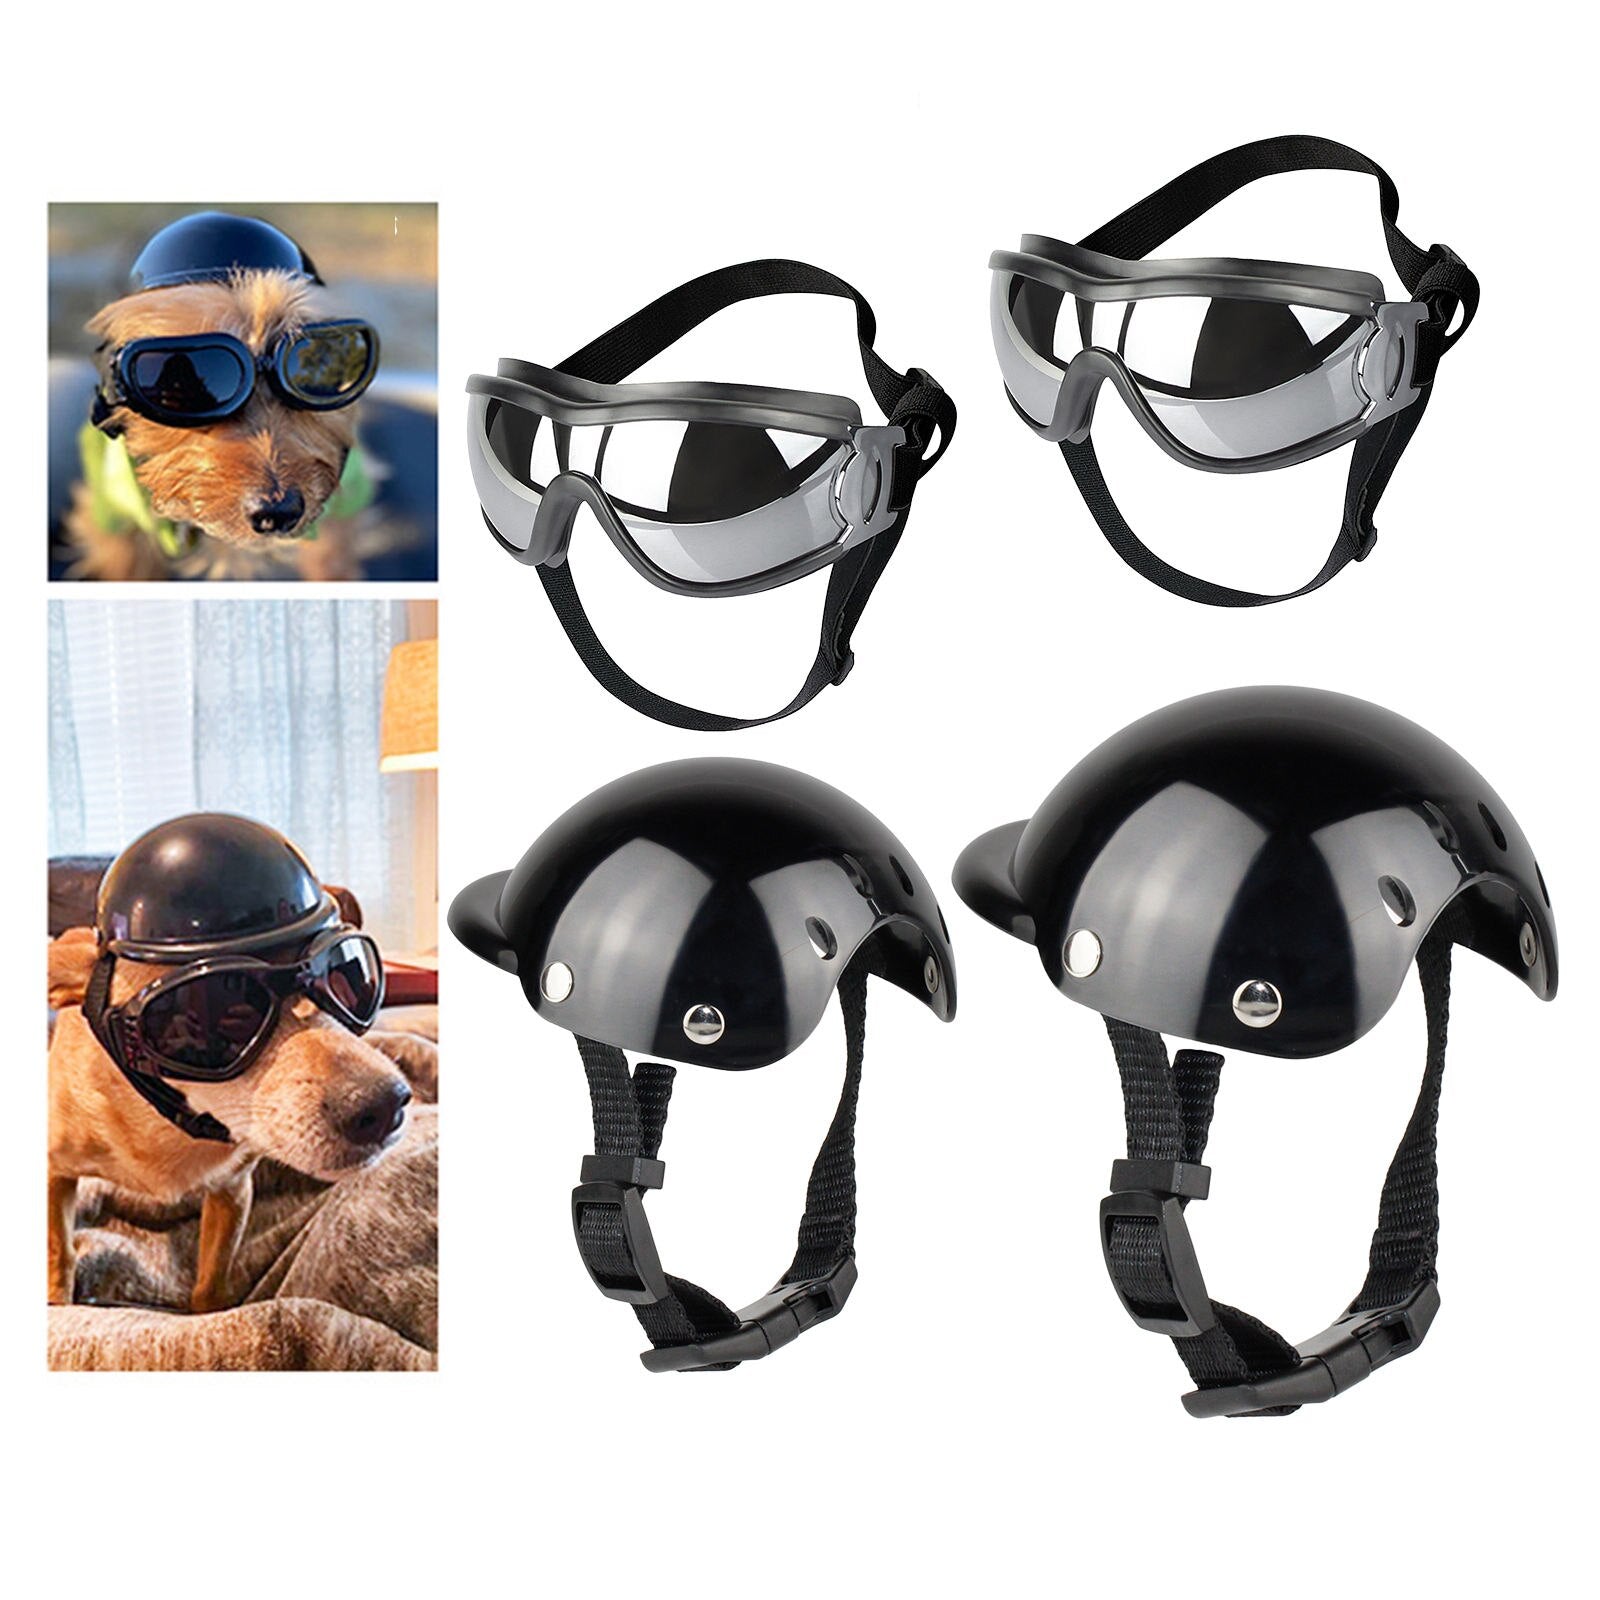 Summer Dog Hat Motorcycle Helmet with Sunglasses